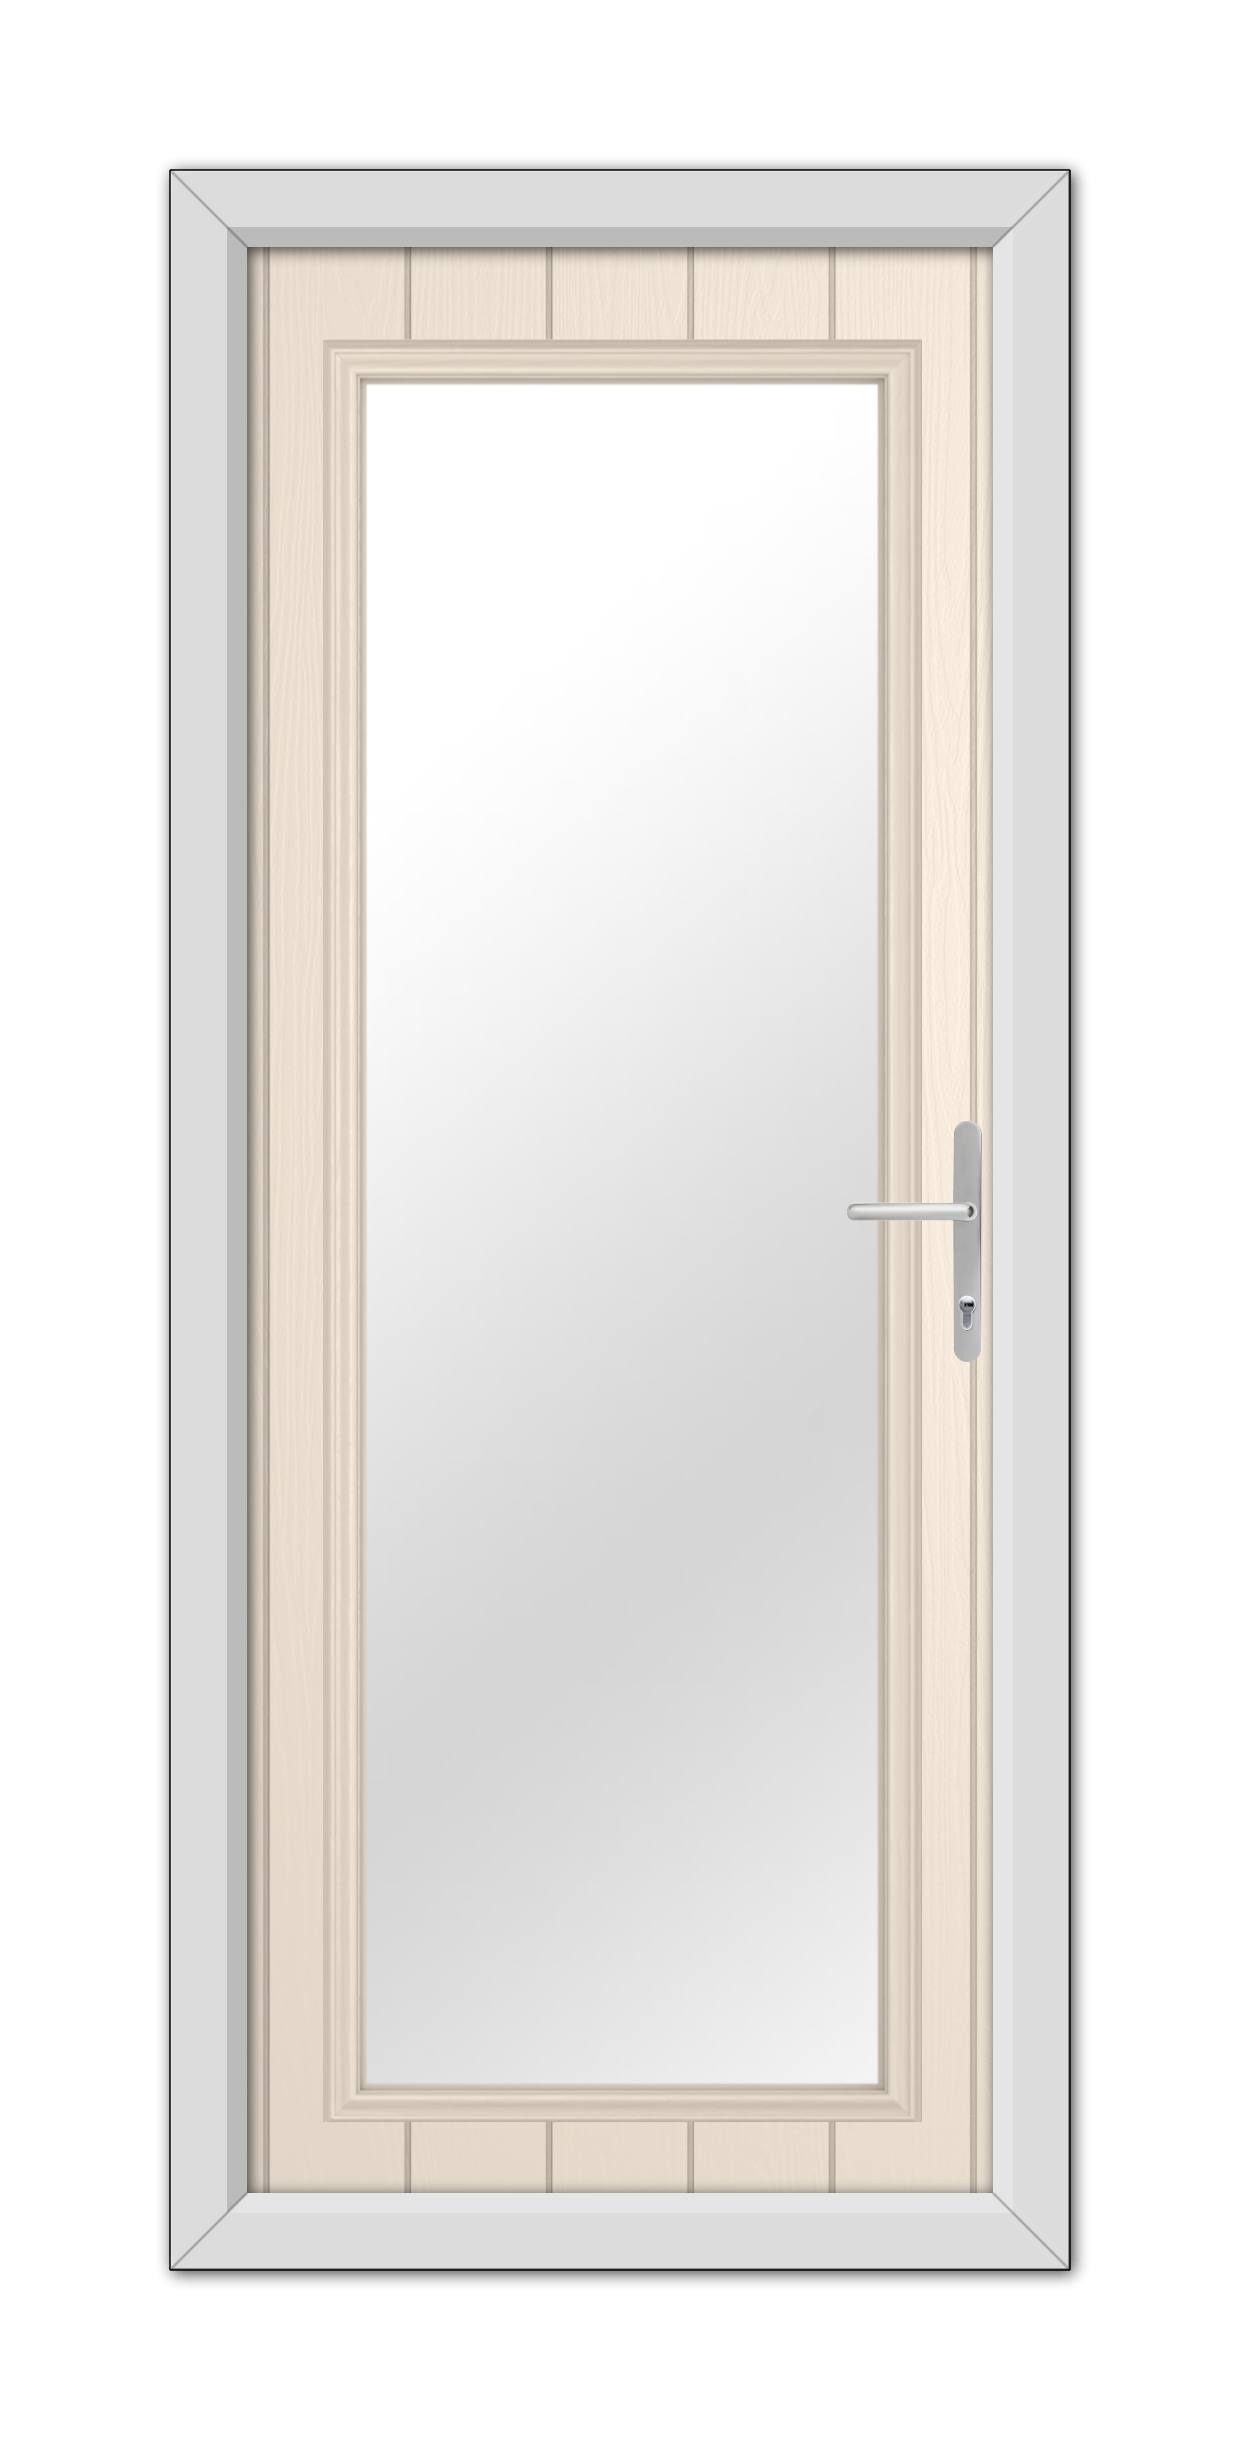 A Cream Hatton Composite Door 48mm Timber Core with a metal handle, set within a wooden frame, featuring a large rectangular glass panel.